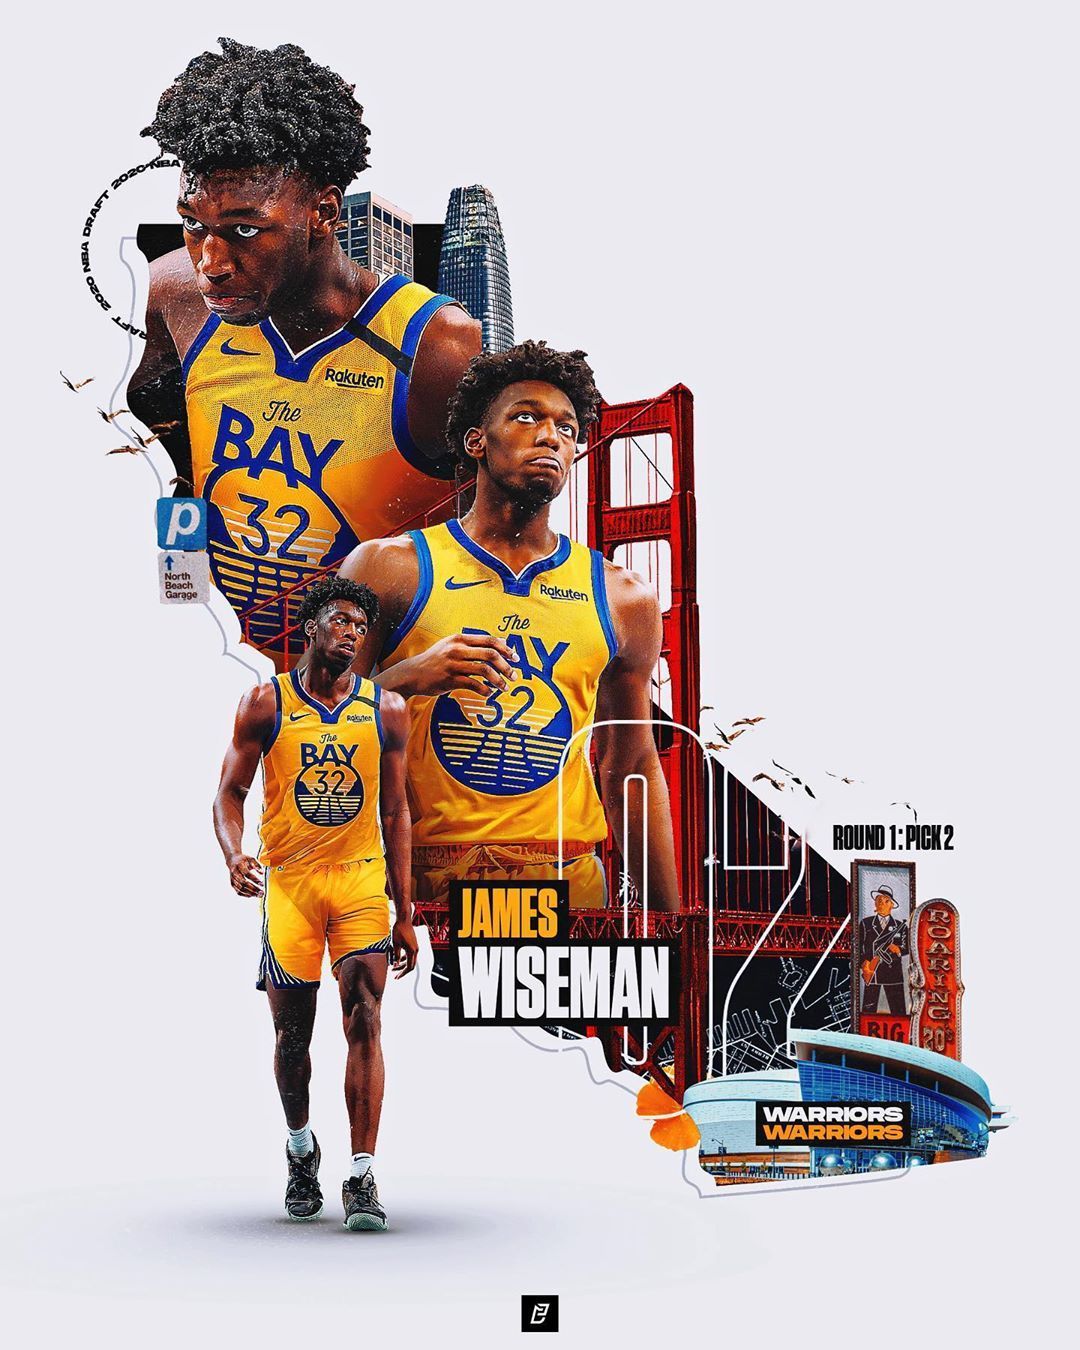 Enrique Castellano on Instagram: “With the second pick in the 2020 NBA Draft, the. Golden state warriors wallpaper, Sport poster design, Sports design inspiration